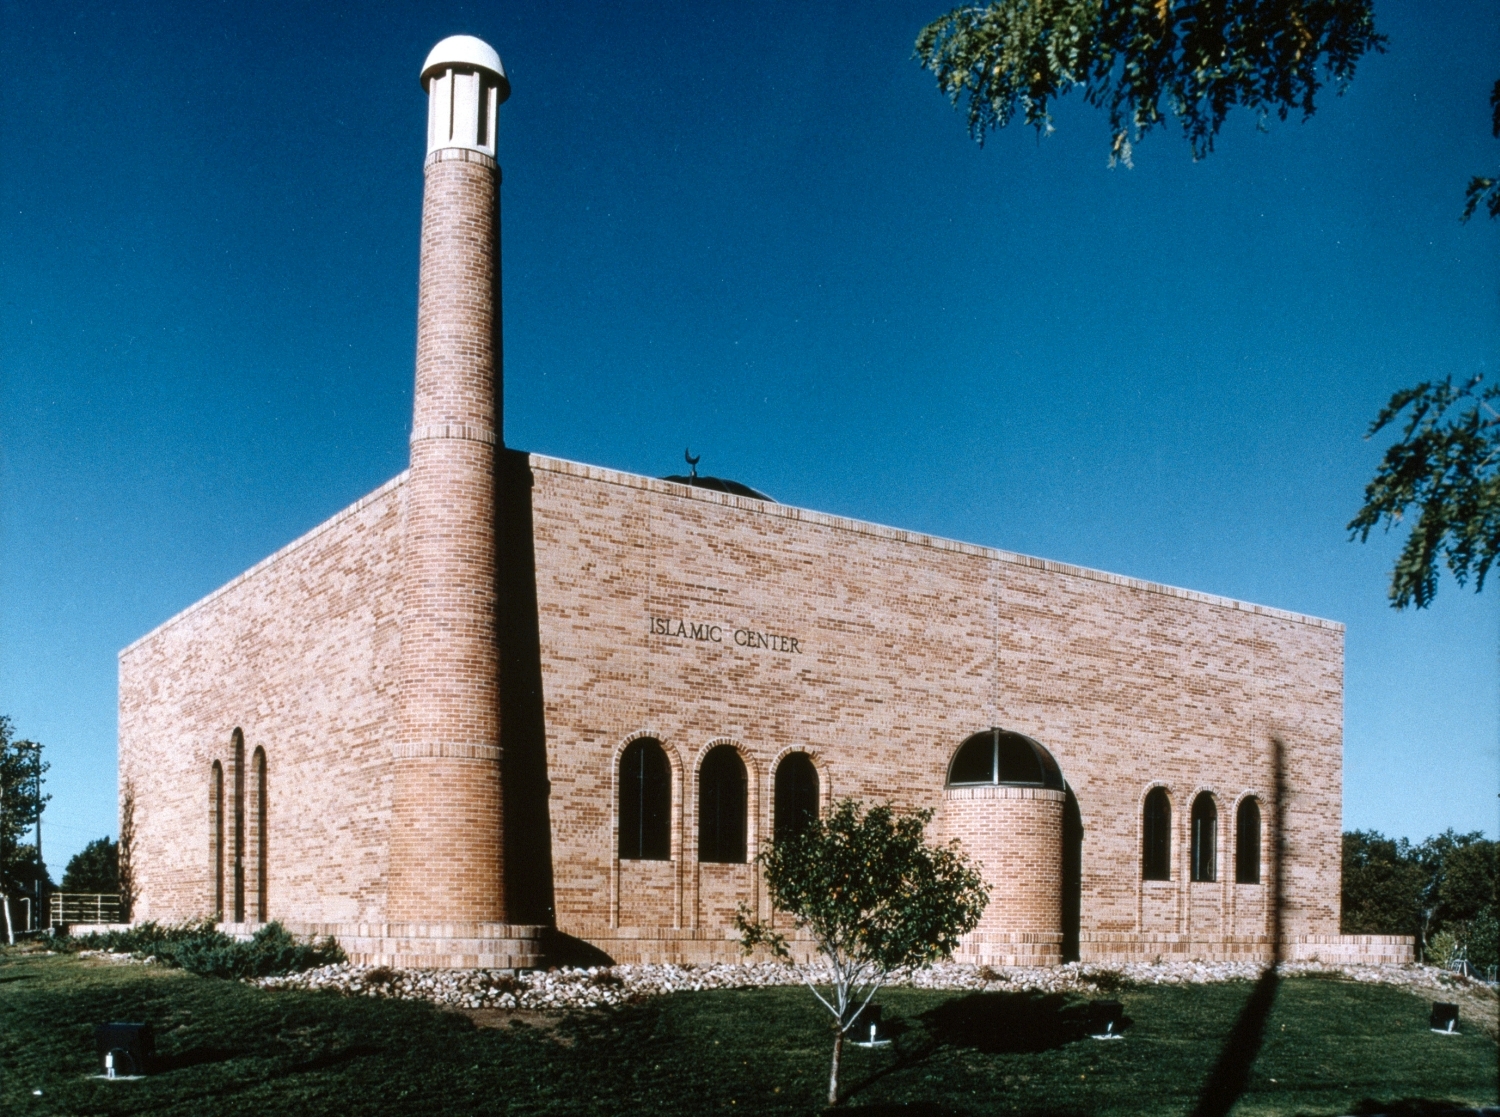 Exterior view, northeastern facade, with minaret and mihrab